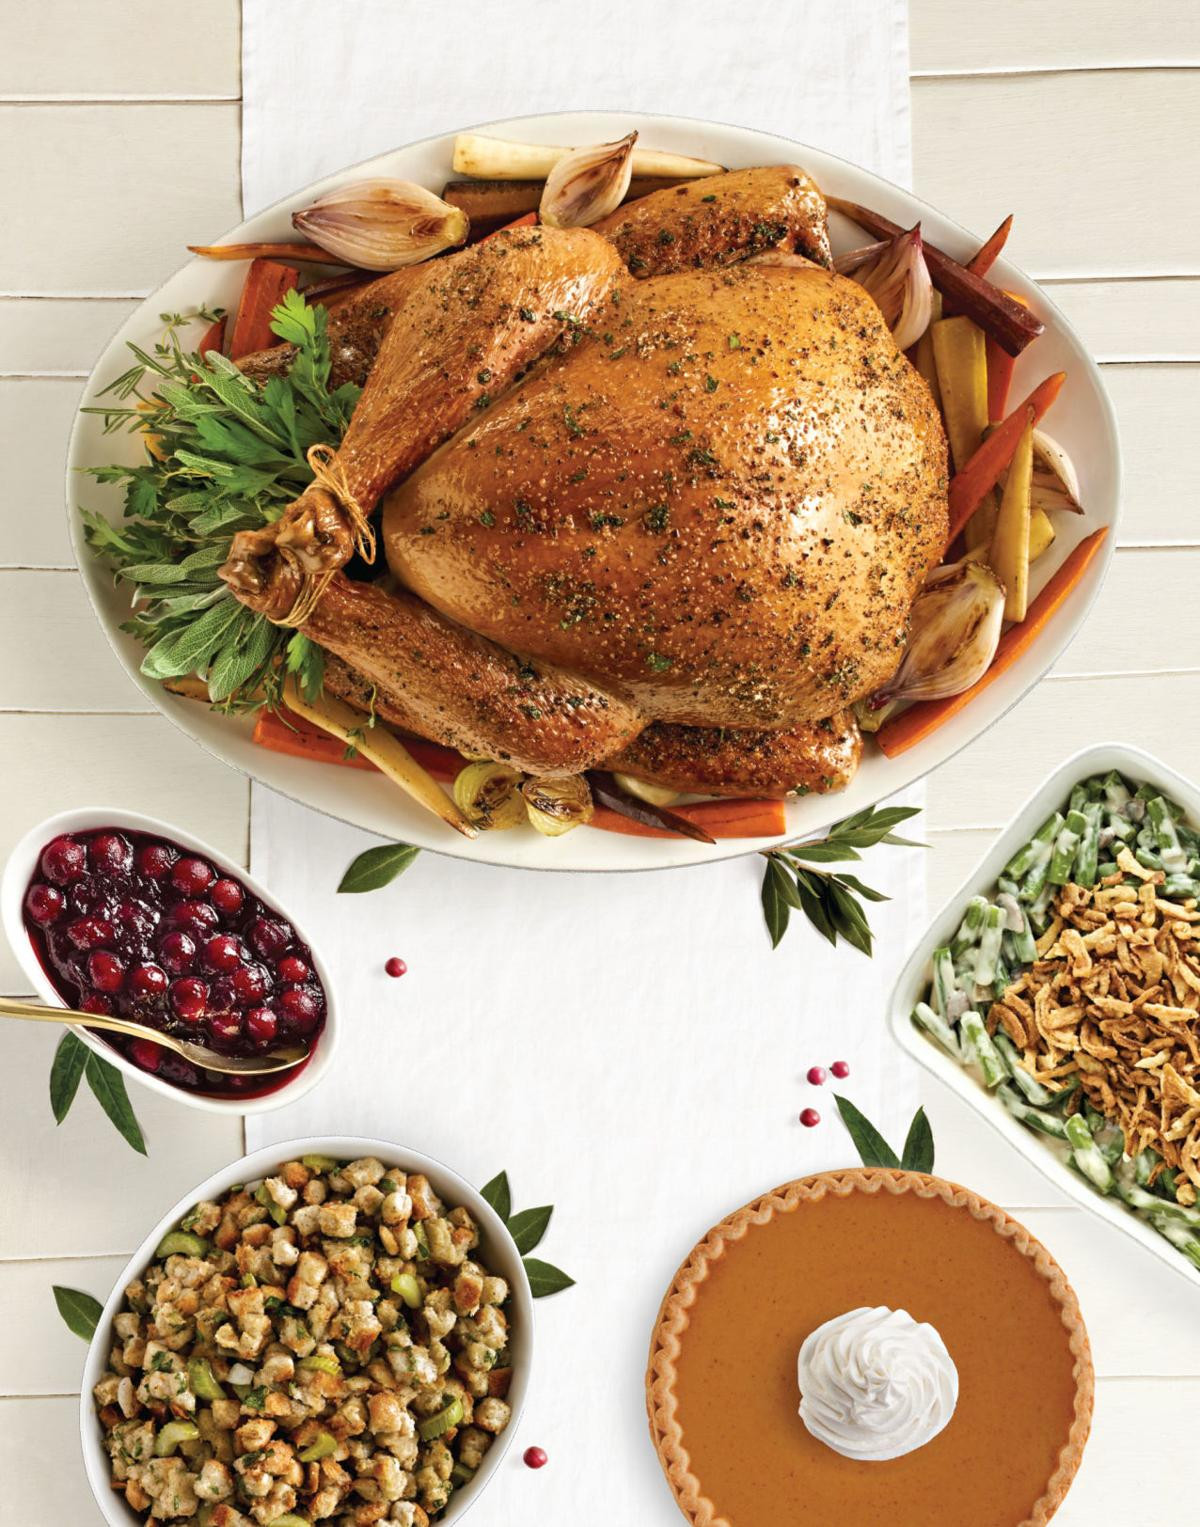 Hyvee Christmas Dinners 2019 - 20 Christmas Dinners & Buffet Ideas in Singapore for an ... / If you planning a dinner and are not on the list, please drop us a line.